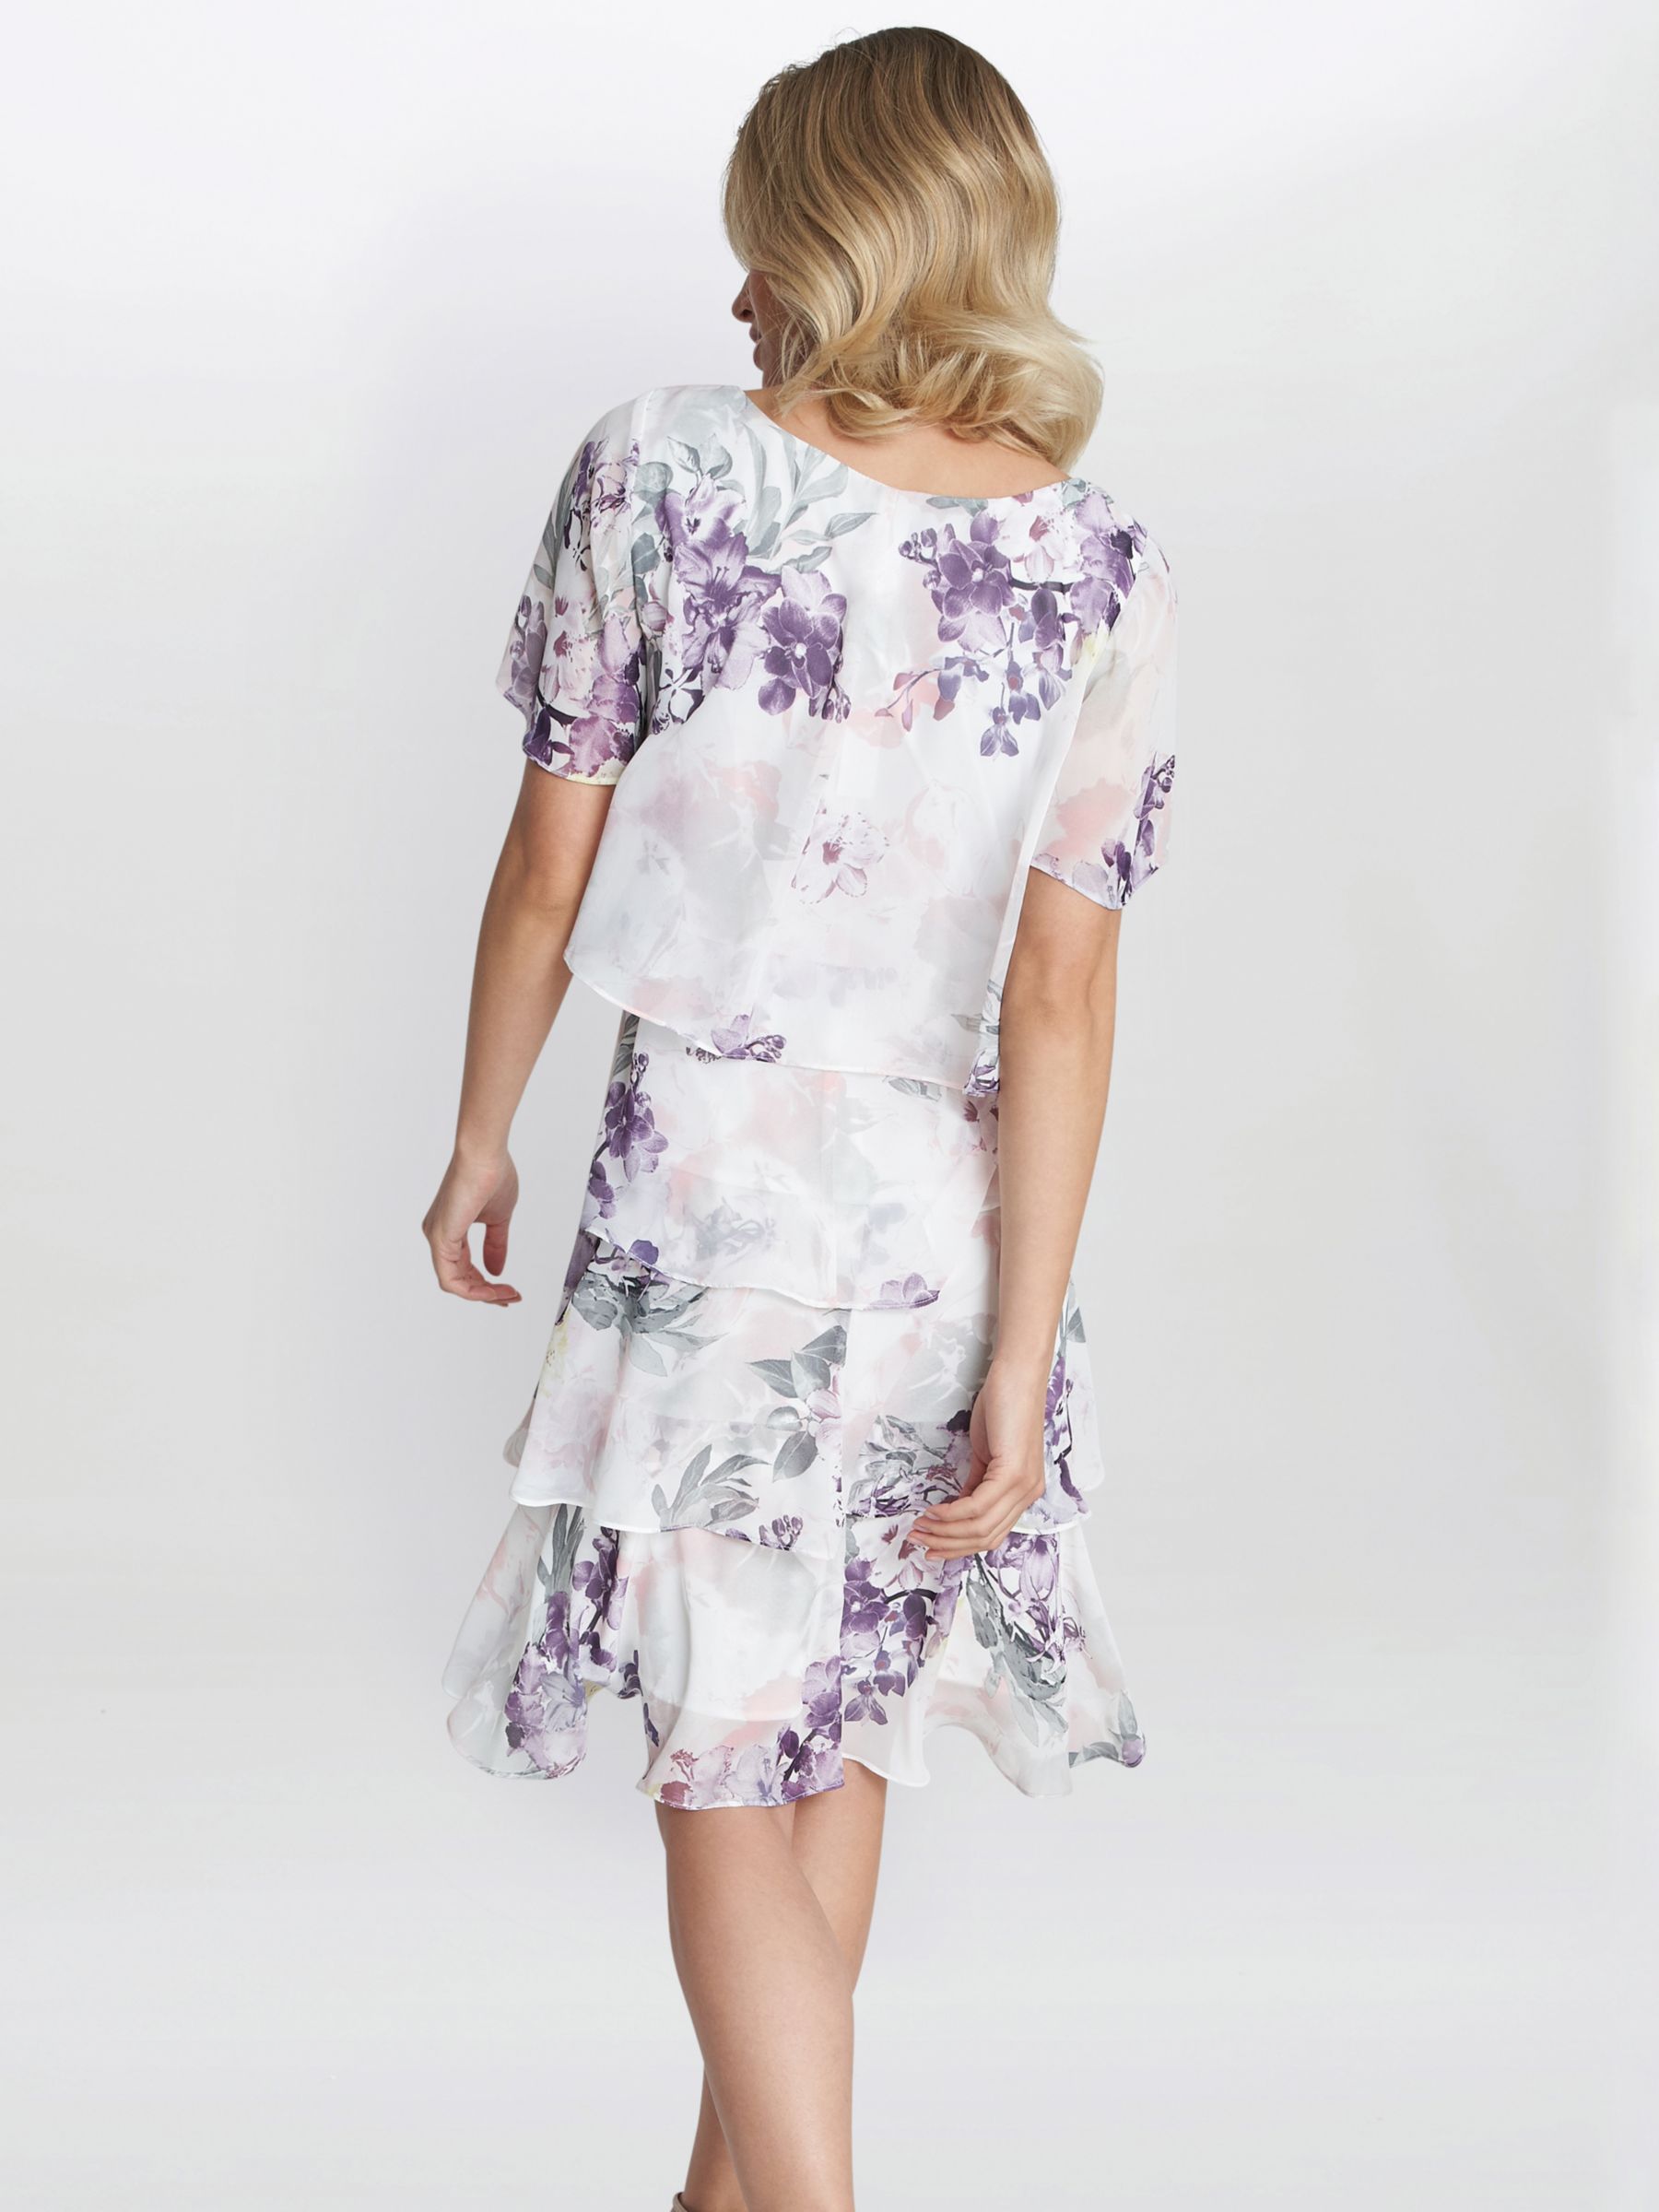 Buy Gina Bacconi Kia Floral Print Tiered Dress, Ivory/Multi Online at johnlewis.com